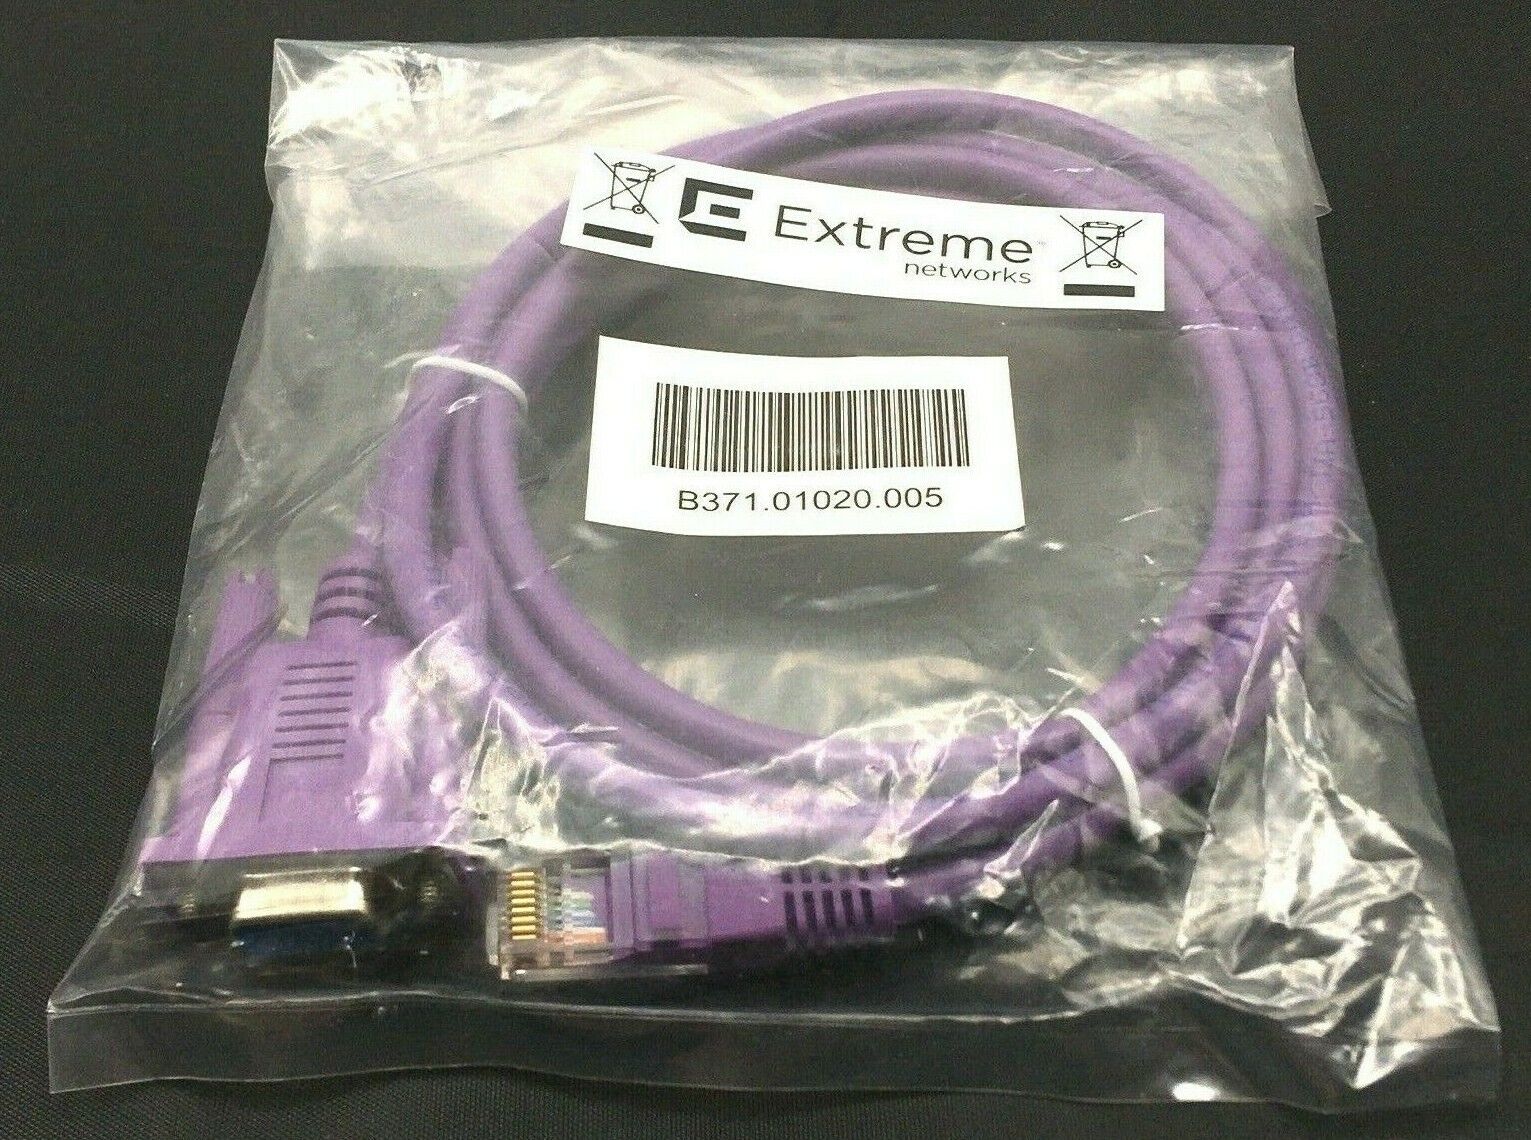 Extreme Networks Console Cable Adapter Cat 5E DB9 F Ethernet Network Cable